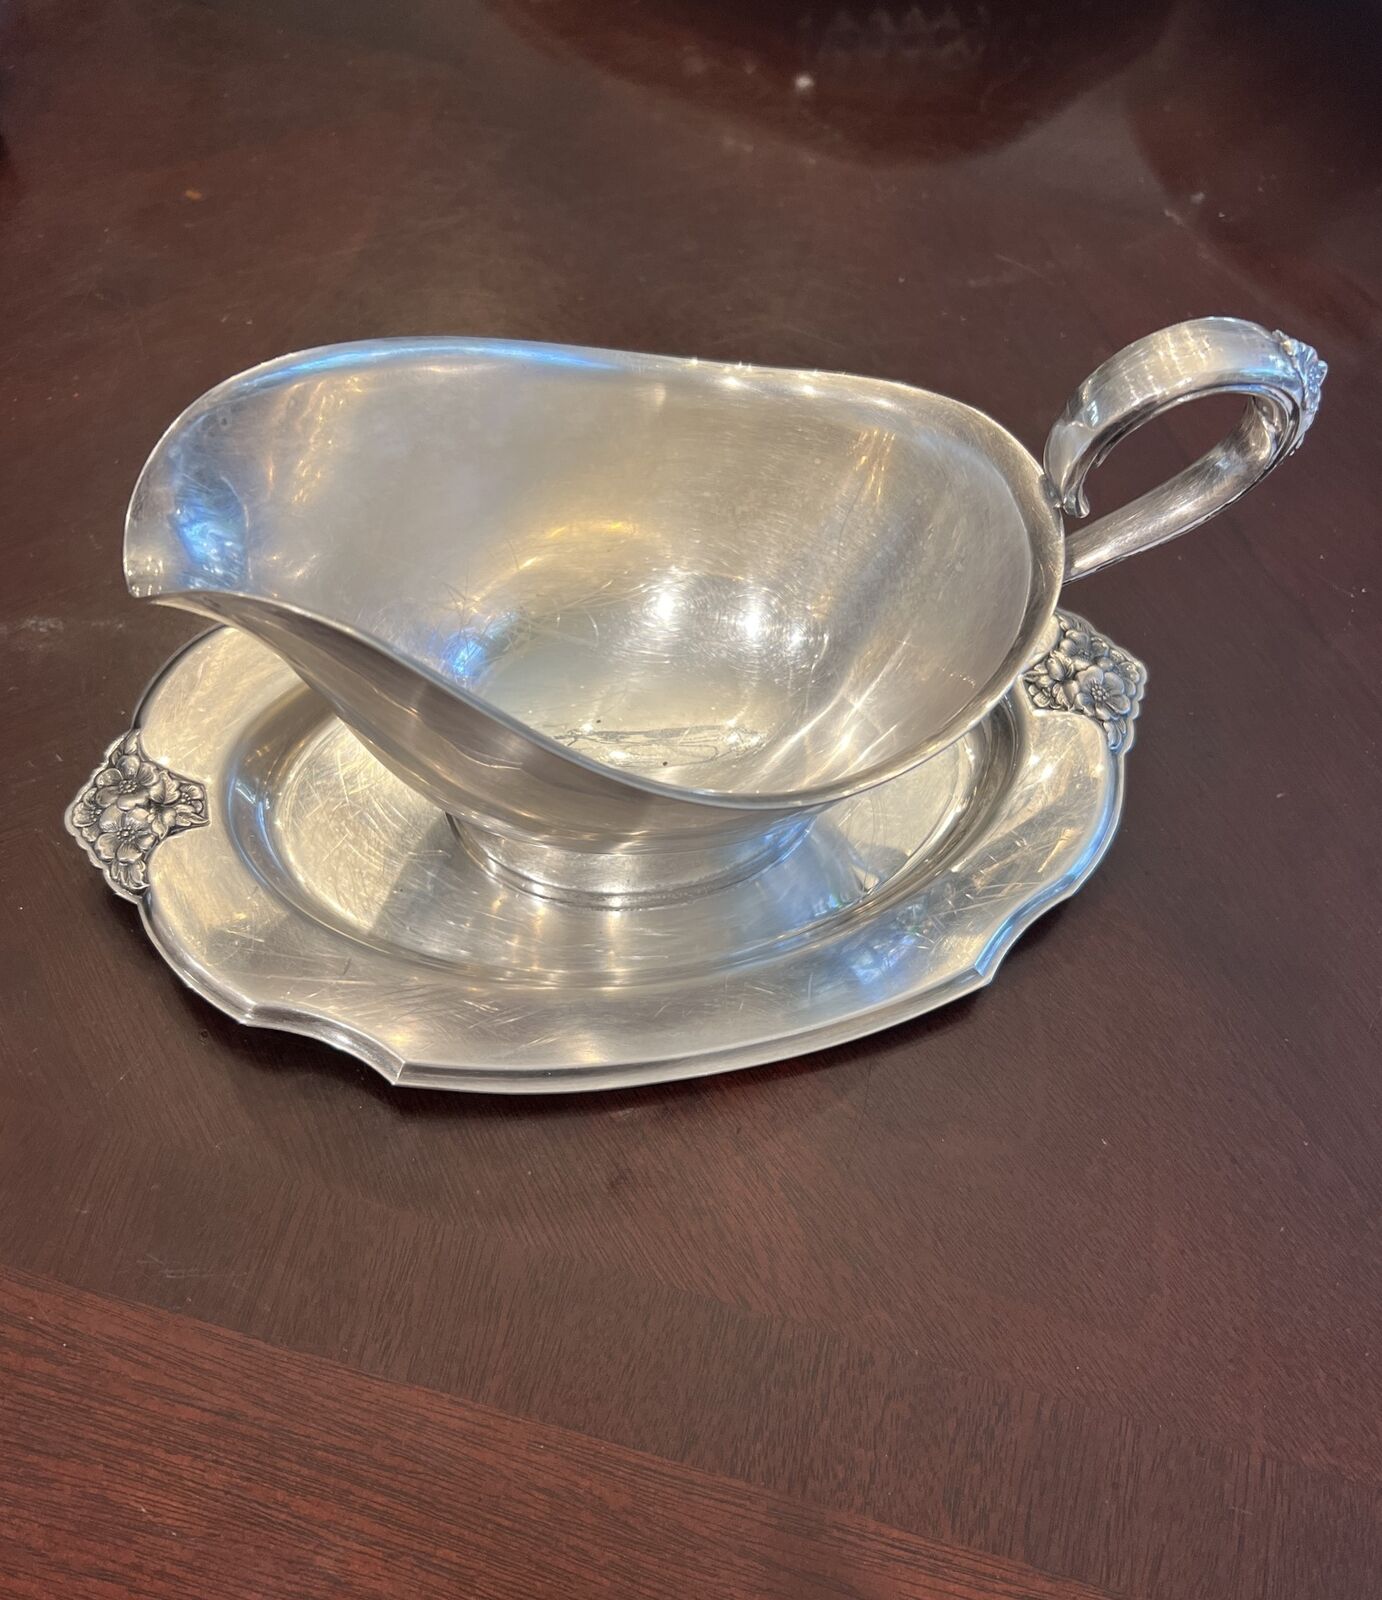 Webster Wilcox International Silver Co. Silverplate Gravy Boat w/ Attached Plate